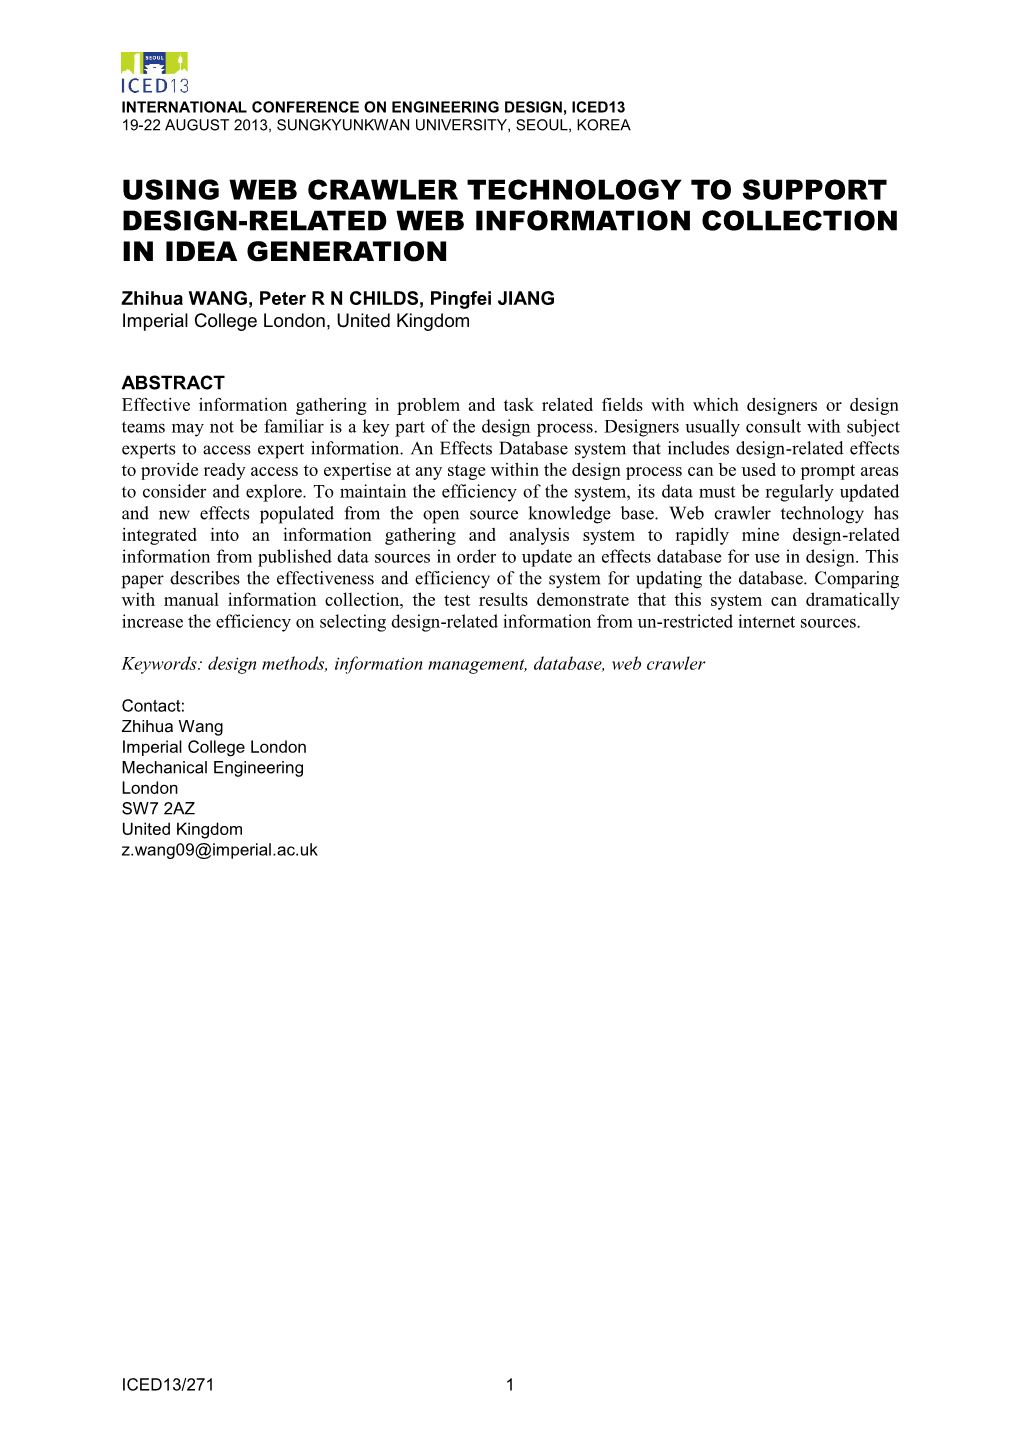 Using Web Crawler Technology to Support Design-Related Web Information Collection in Idea Generation